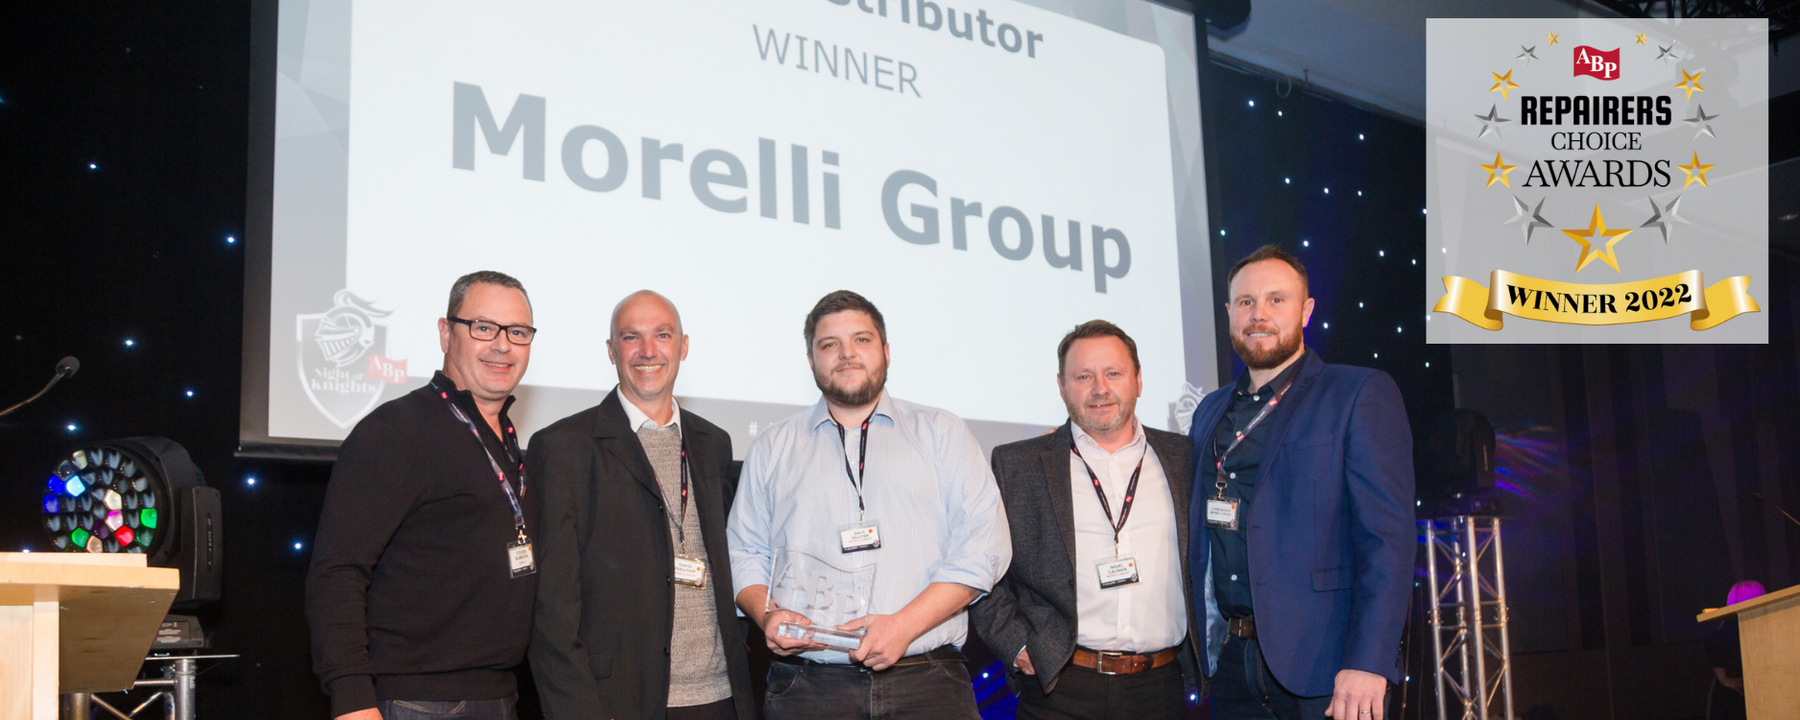 Morelli Group Wins Distributor of the Year for the Second Year Running at ABP Night of Knights 2022